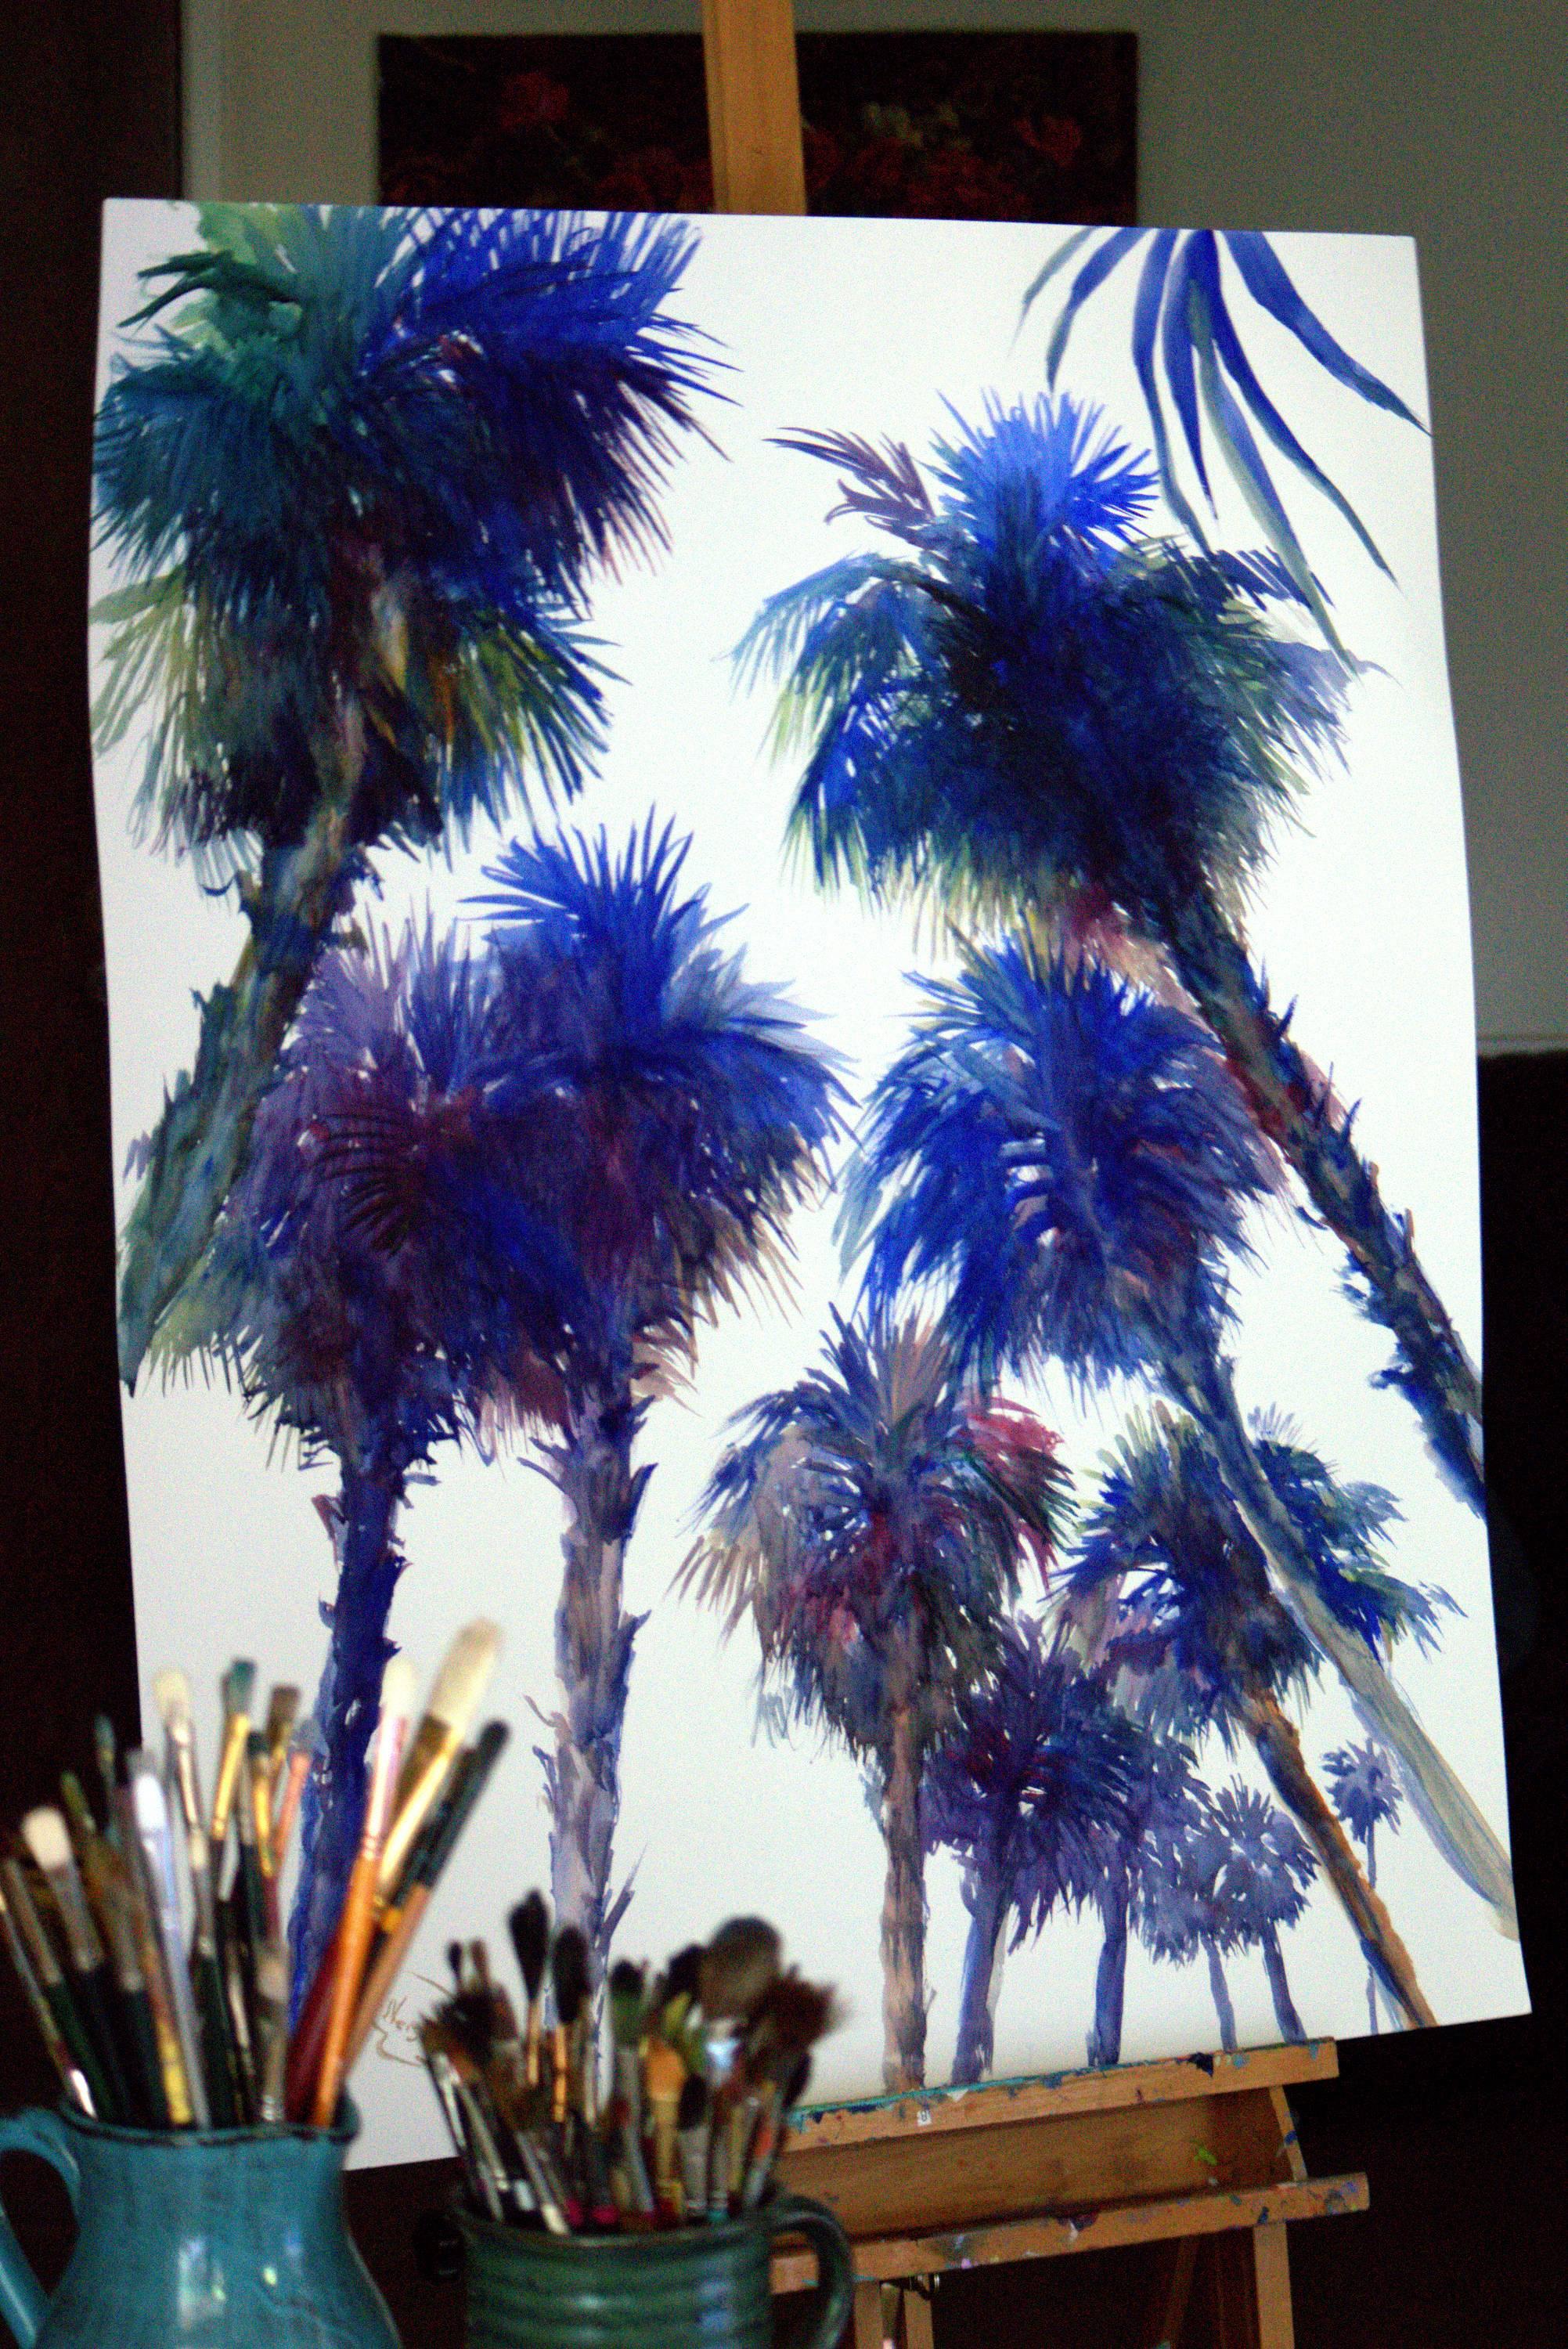 <p>Artist Comments<br>Southern California palm trees always inspire me.  This artwork is from my Palm Tree series. The piece is on heavyweight paper and will need a frame for display.</p><p>About the Artist<br>Suren is an impressionist painter